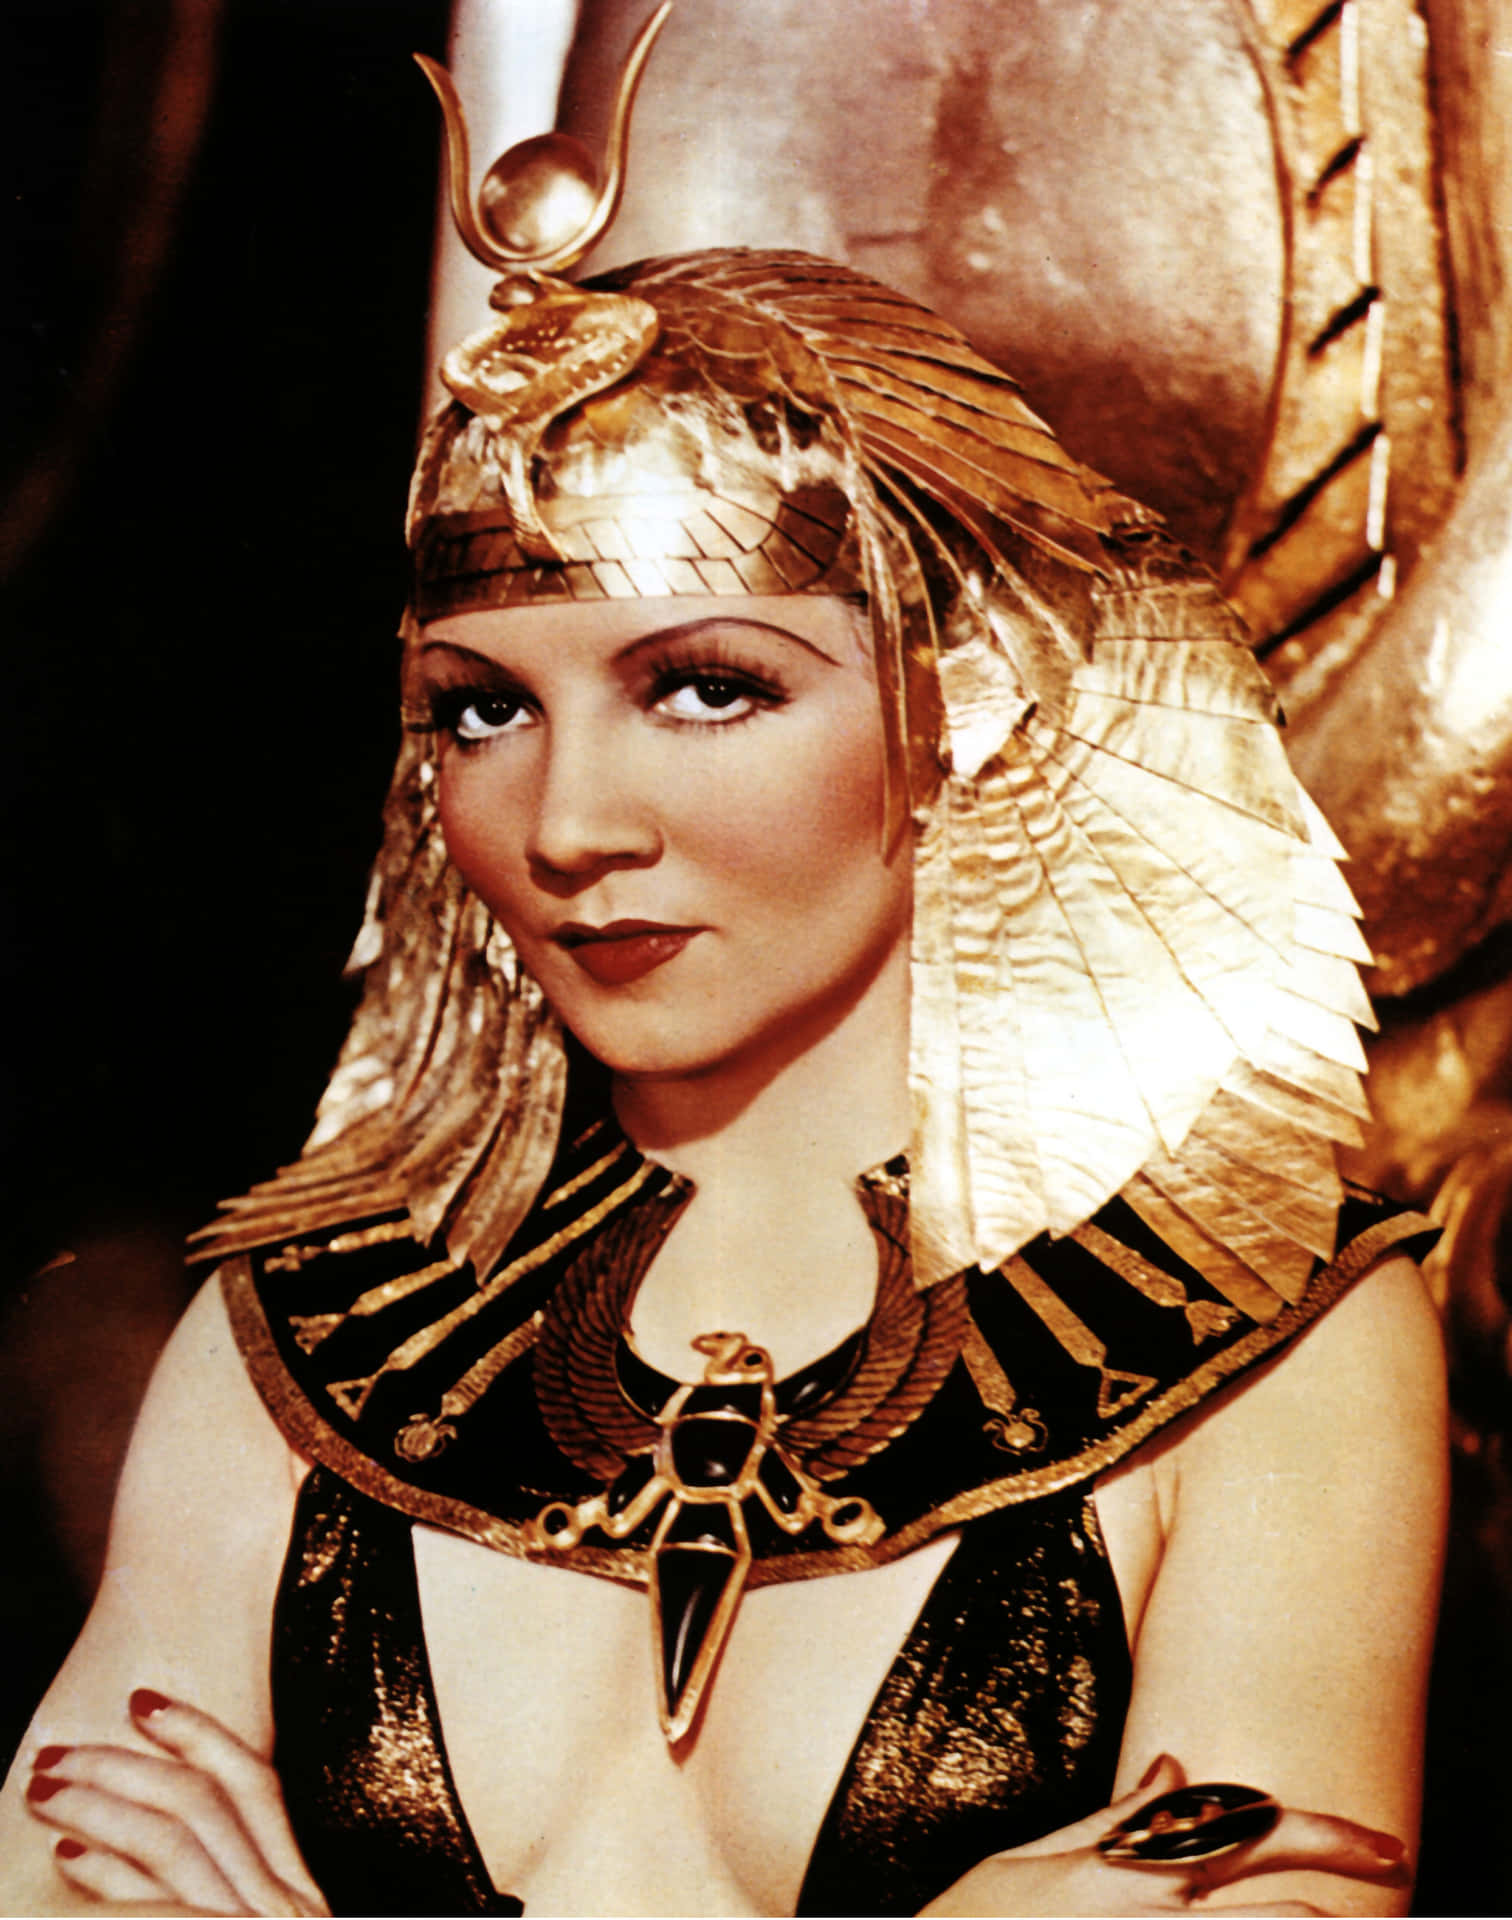 Majestic Cleopatra- Queen of the Nile